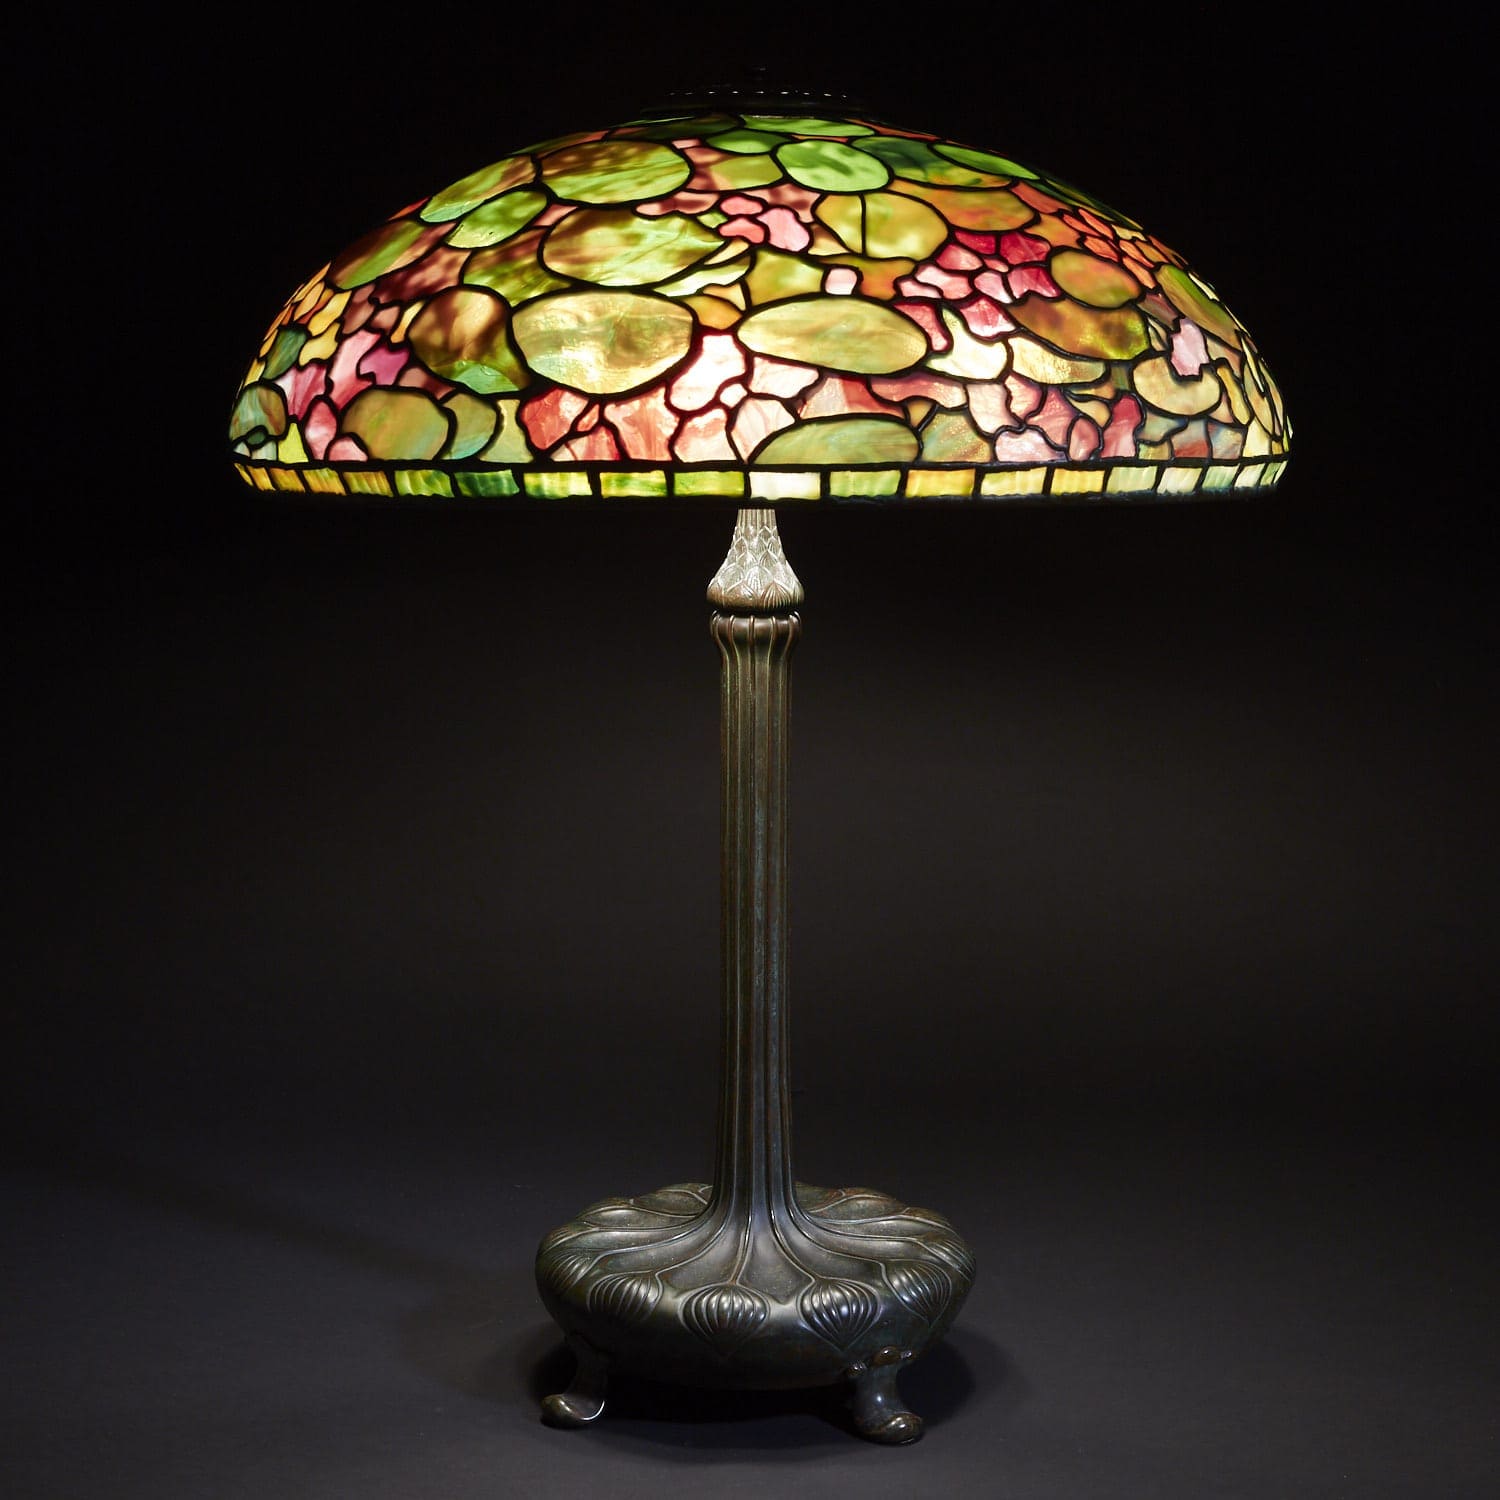 Tiffany Lamps: The History of the Famous Stained Glass Lamps